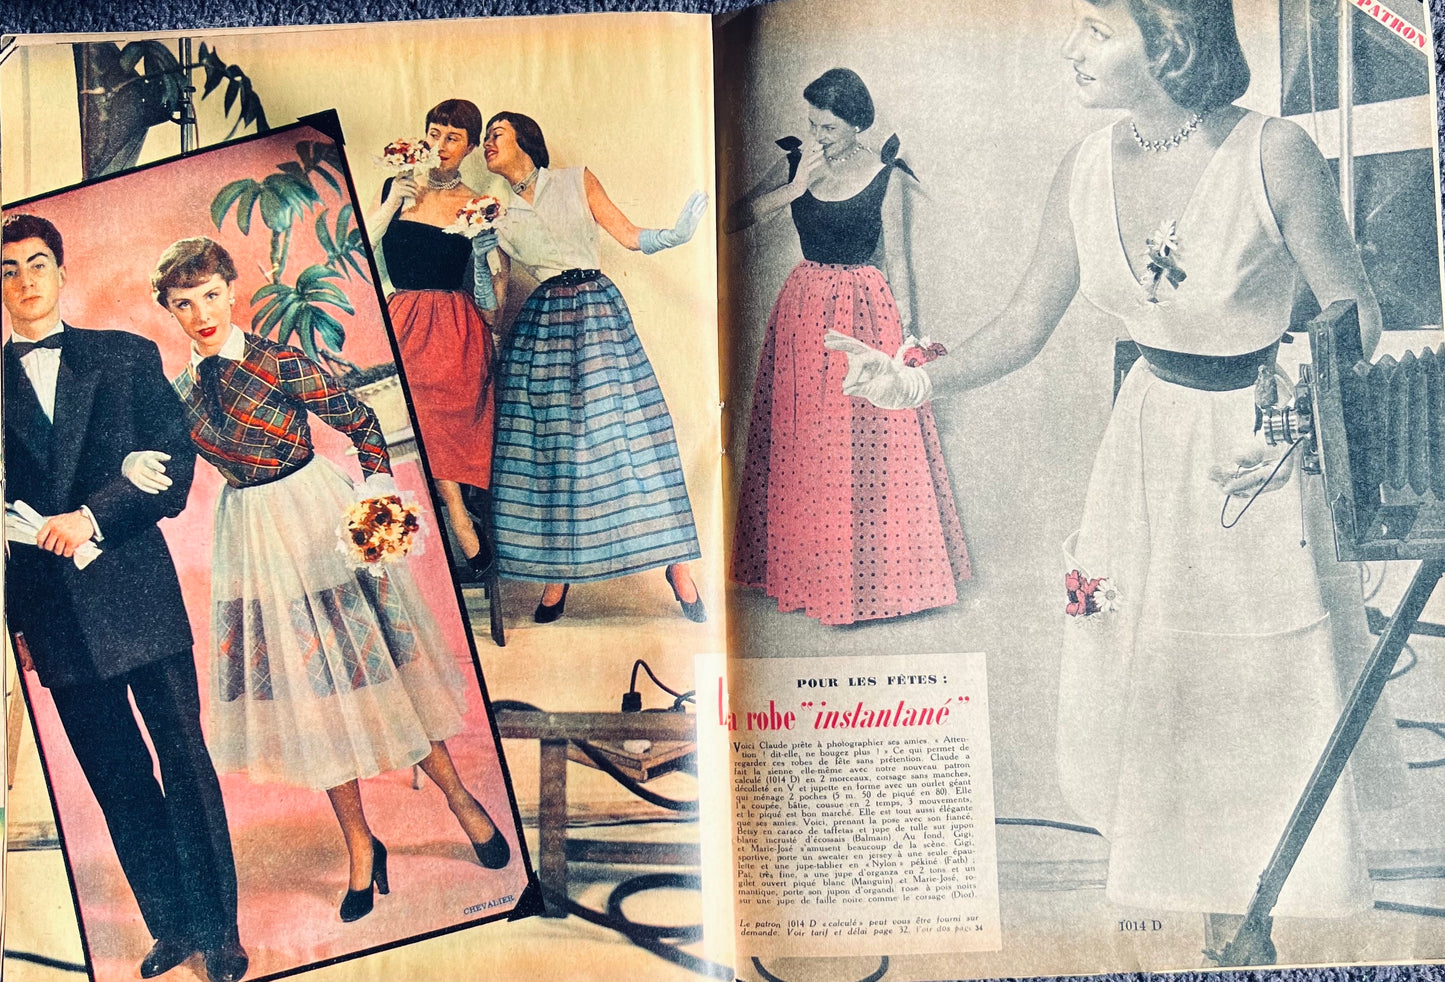 10th April 1950 issue of French ELLE Fashion Magazine